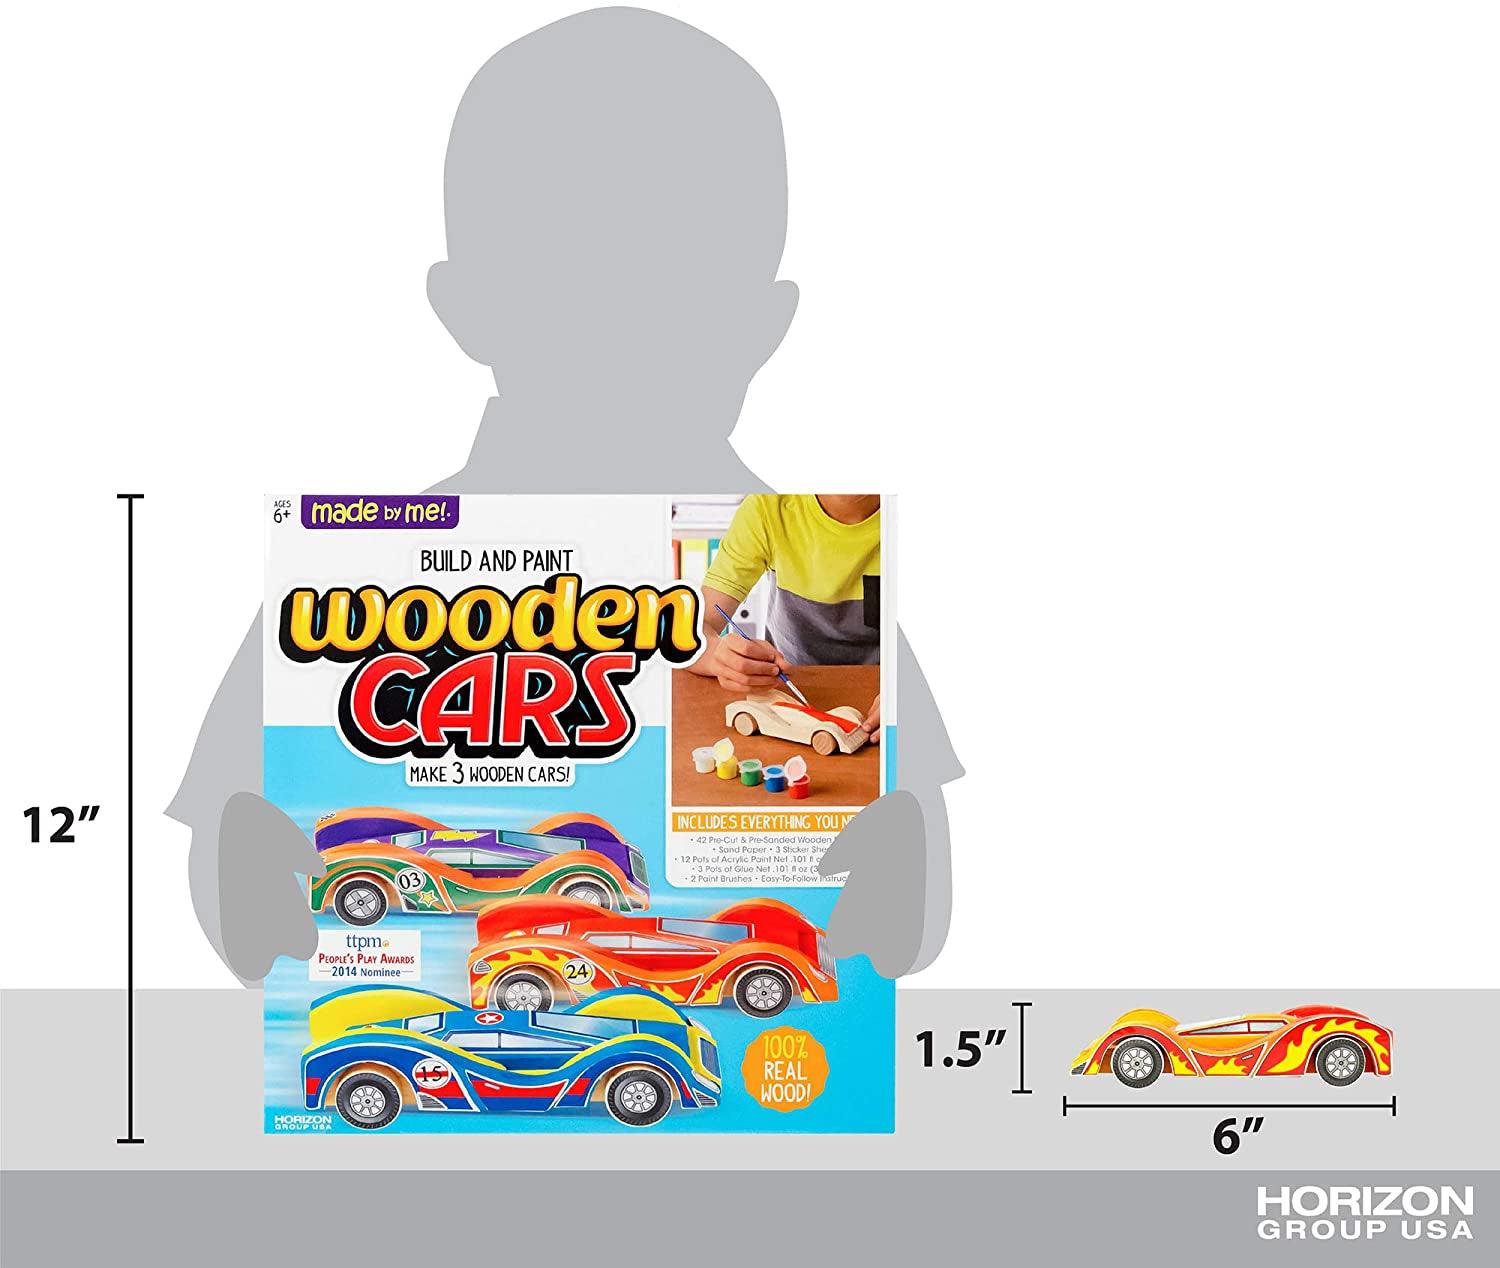 Race Car Wooden Model Build & Play Easy Assembly Arts & Craft Kit  by WoodShop